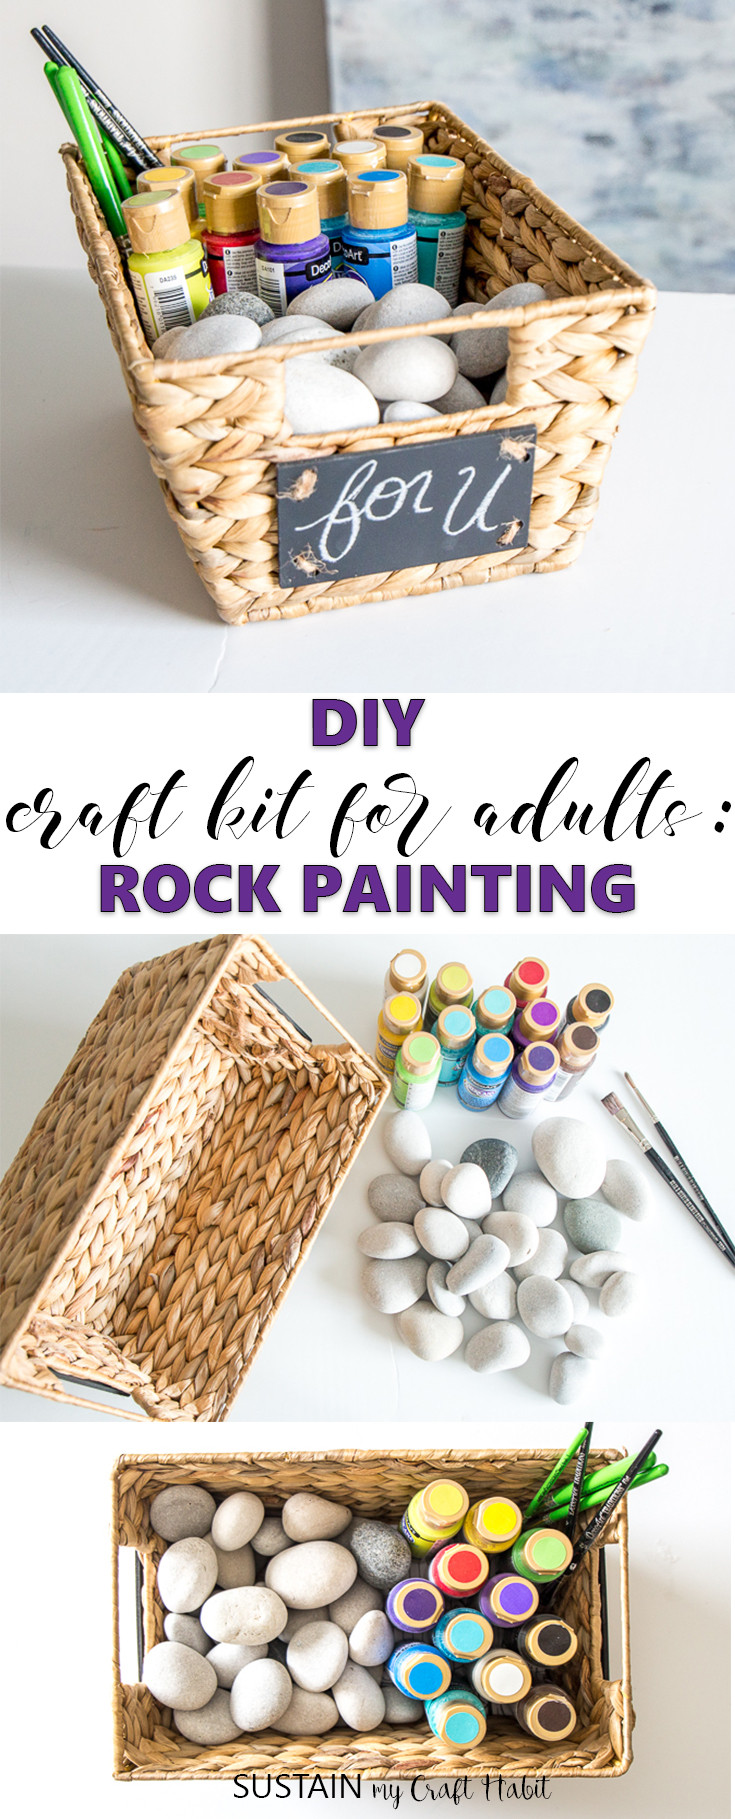 Craft Kits For Adults
 Make your Own Craft Kit for Adults Rock Painting